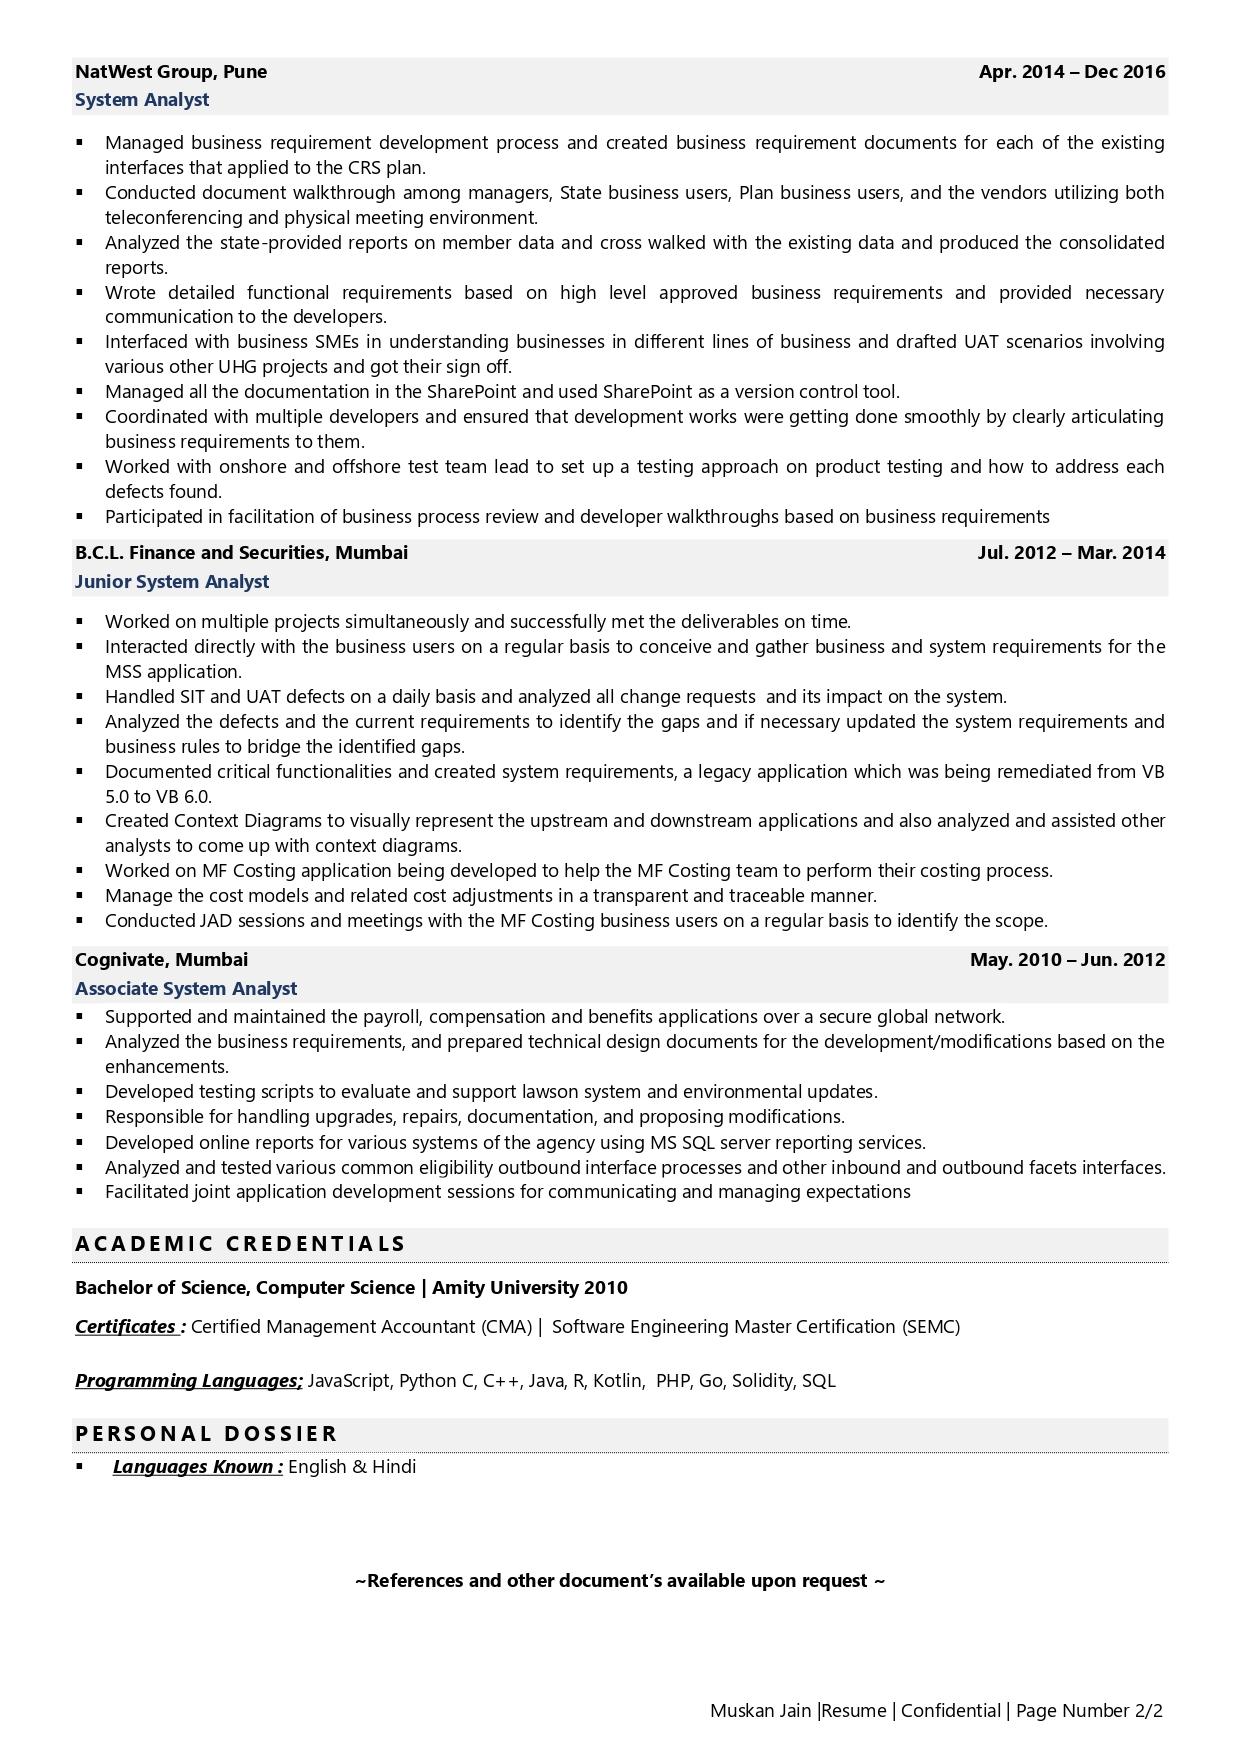 System Analysts - Resume Example & Template